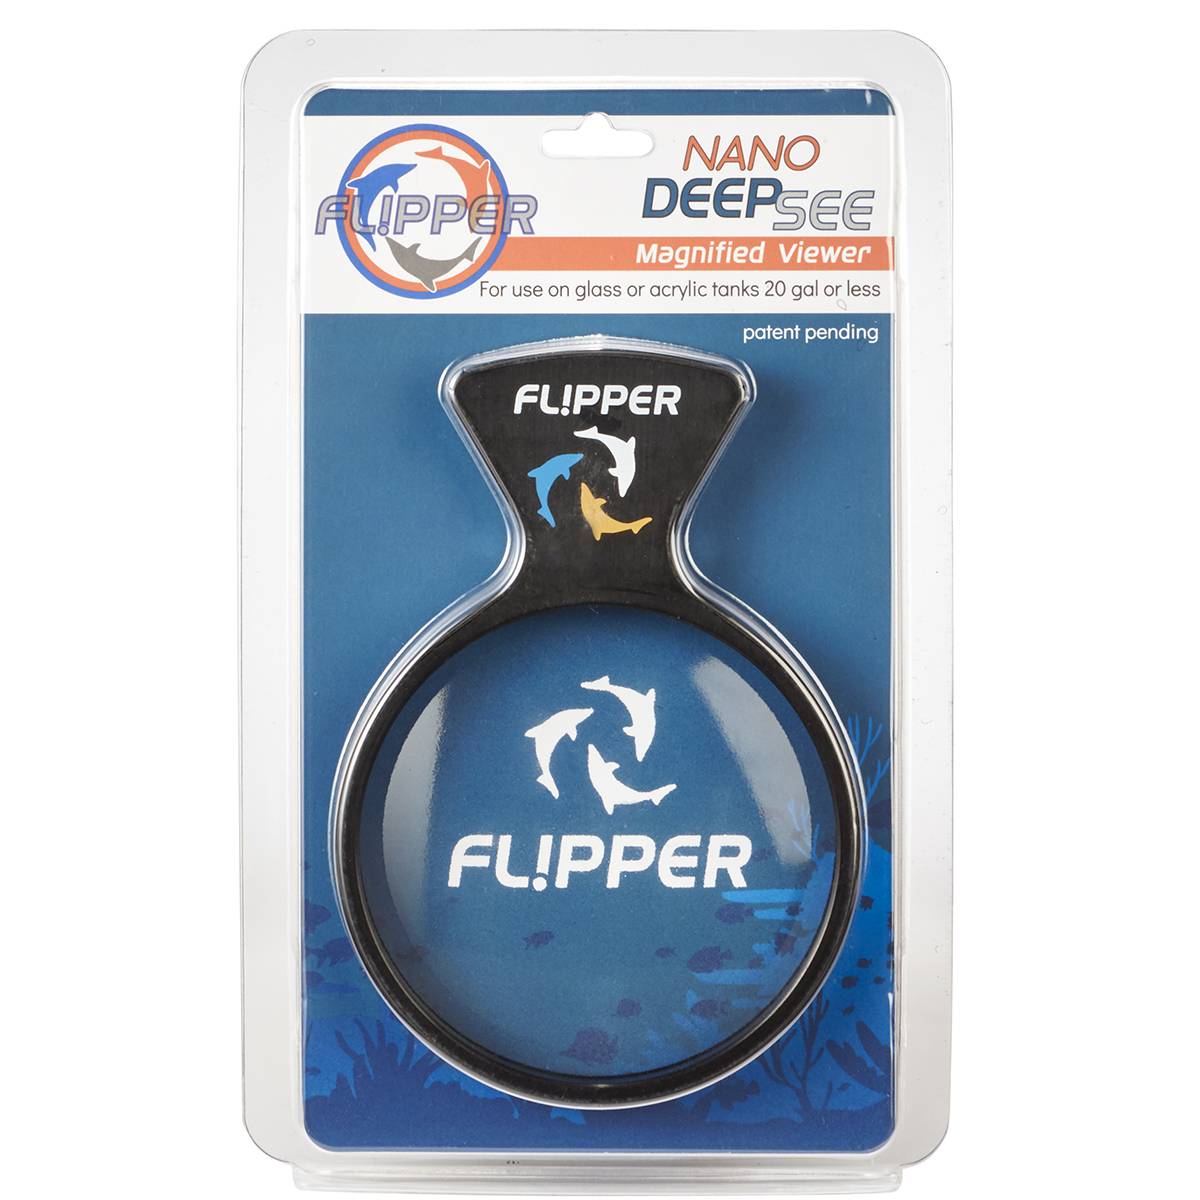 Deepsee Nano Magnified Magnetic Viewer 3" - Flipper